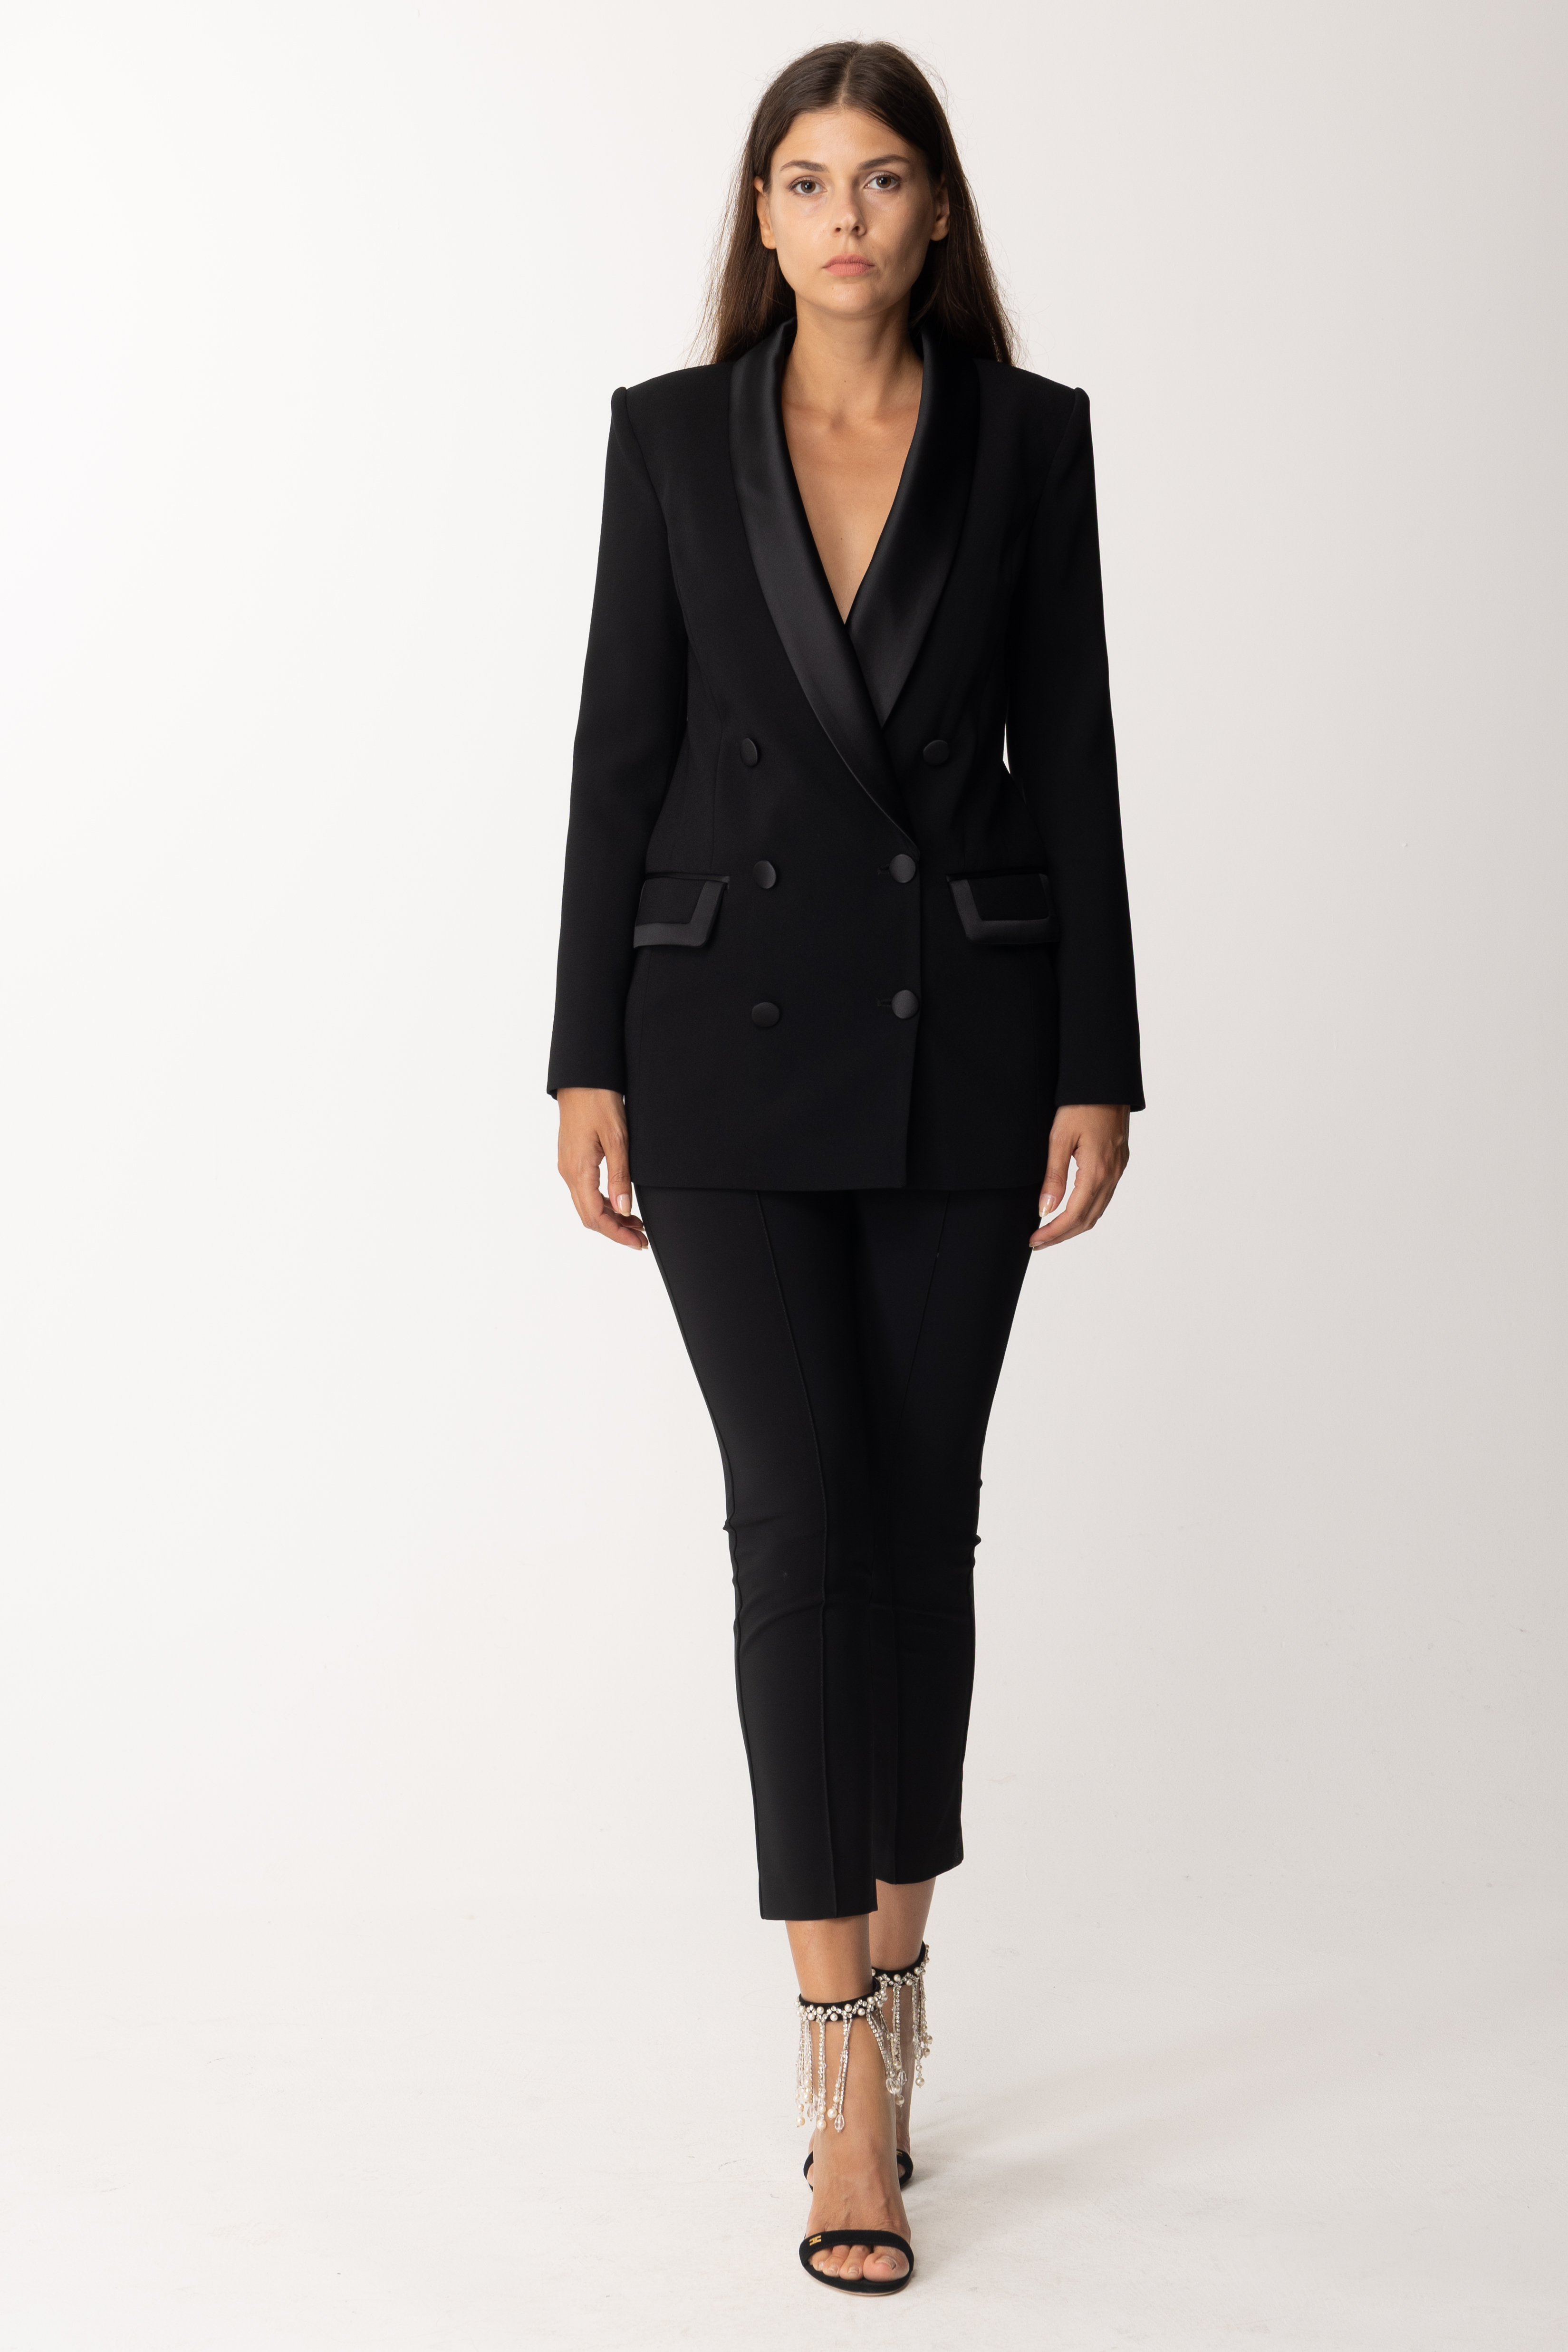 Preview: Elisabetta Franchi Double-Breasted Jacket with Satin Details Nero